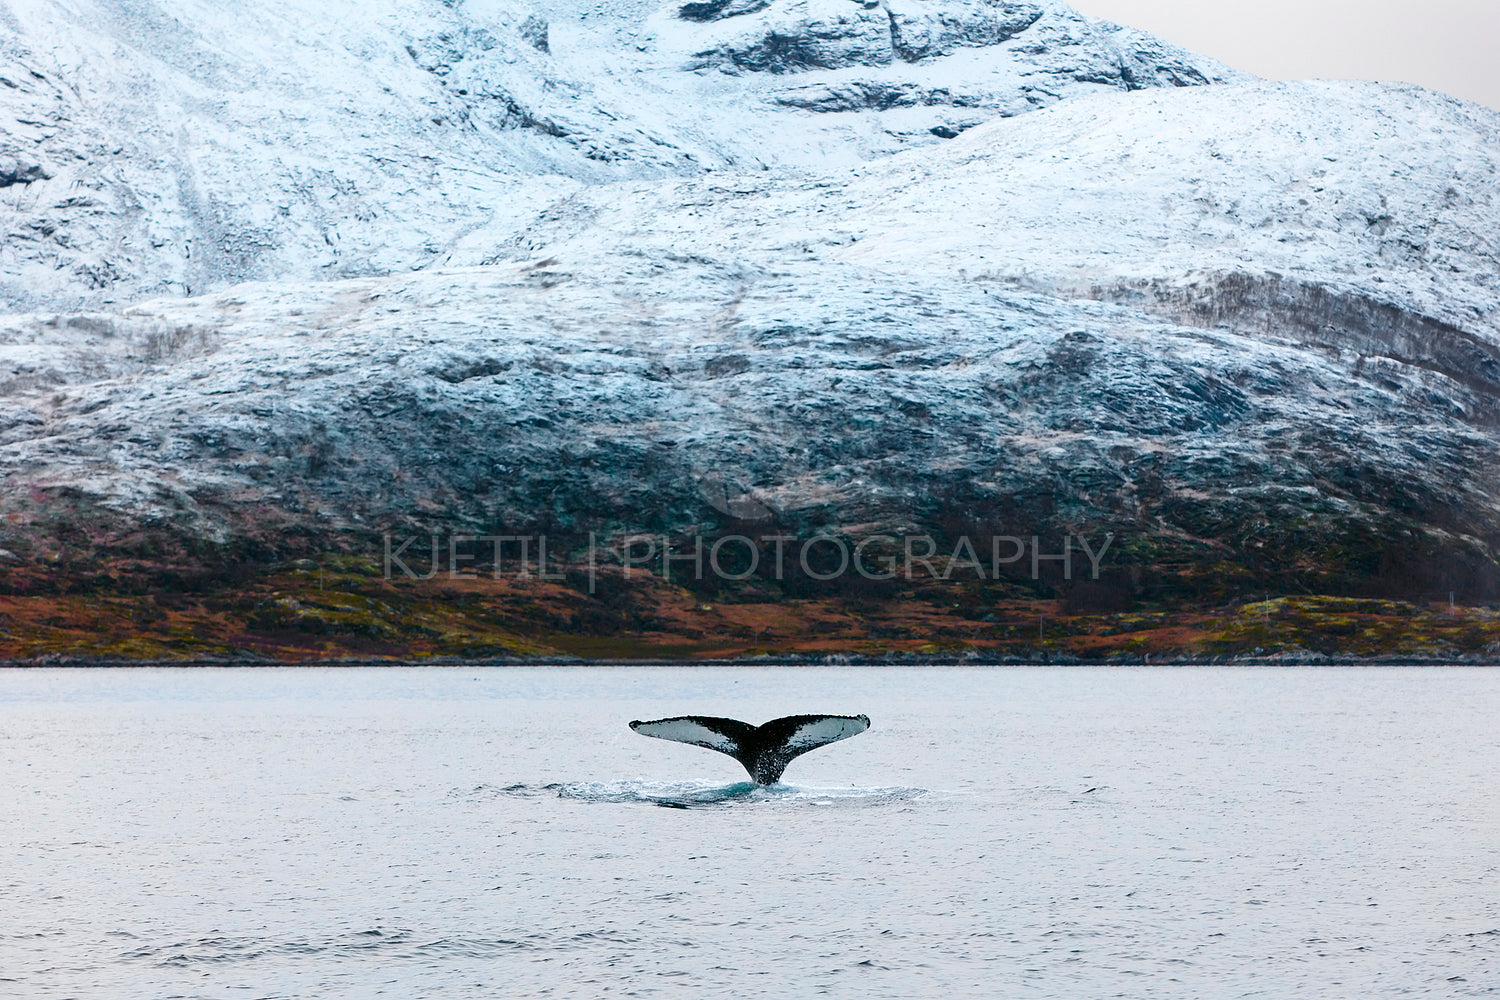 Humpback whale tale fin in the arctic